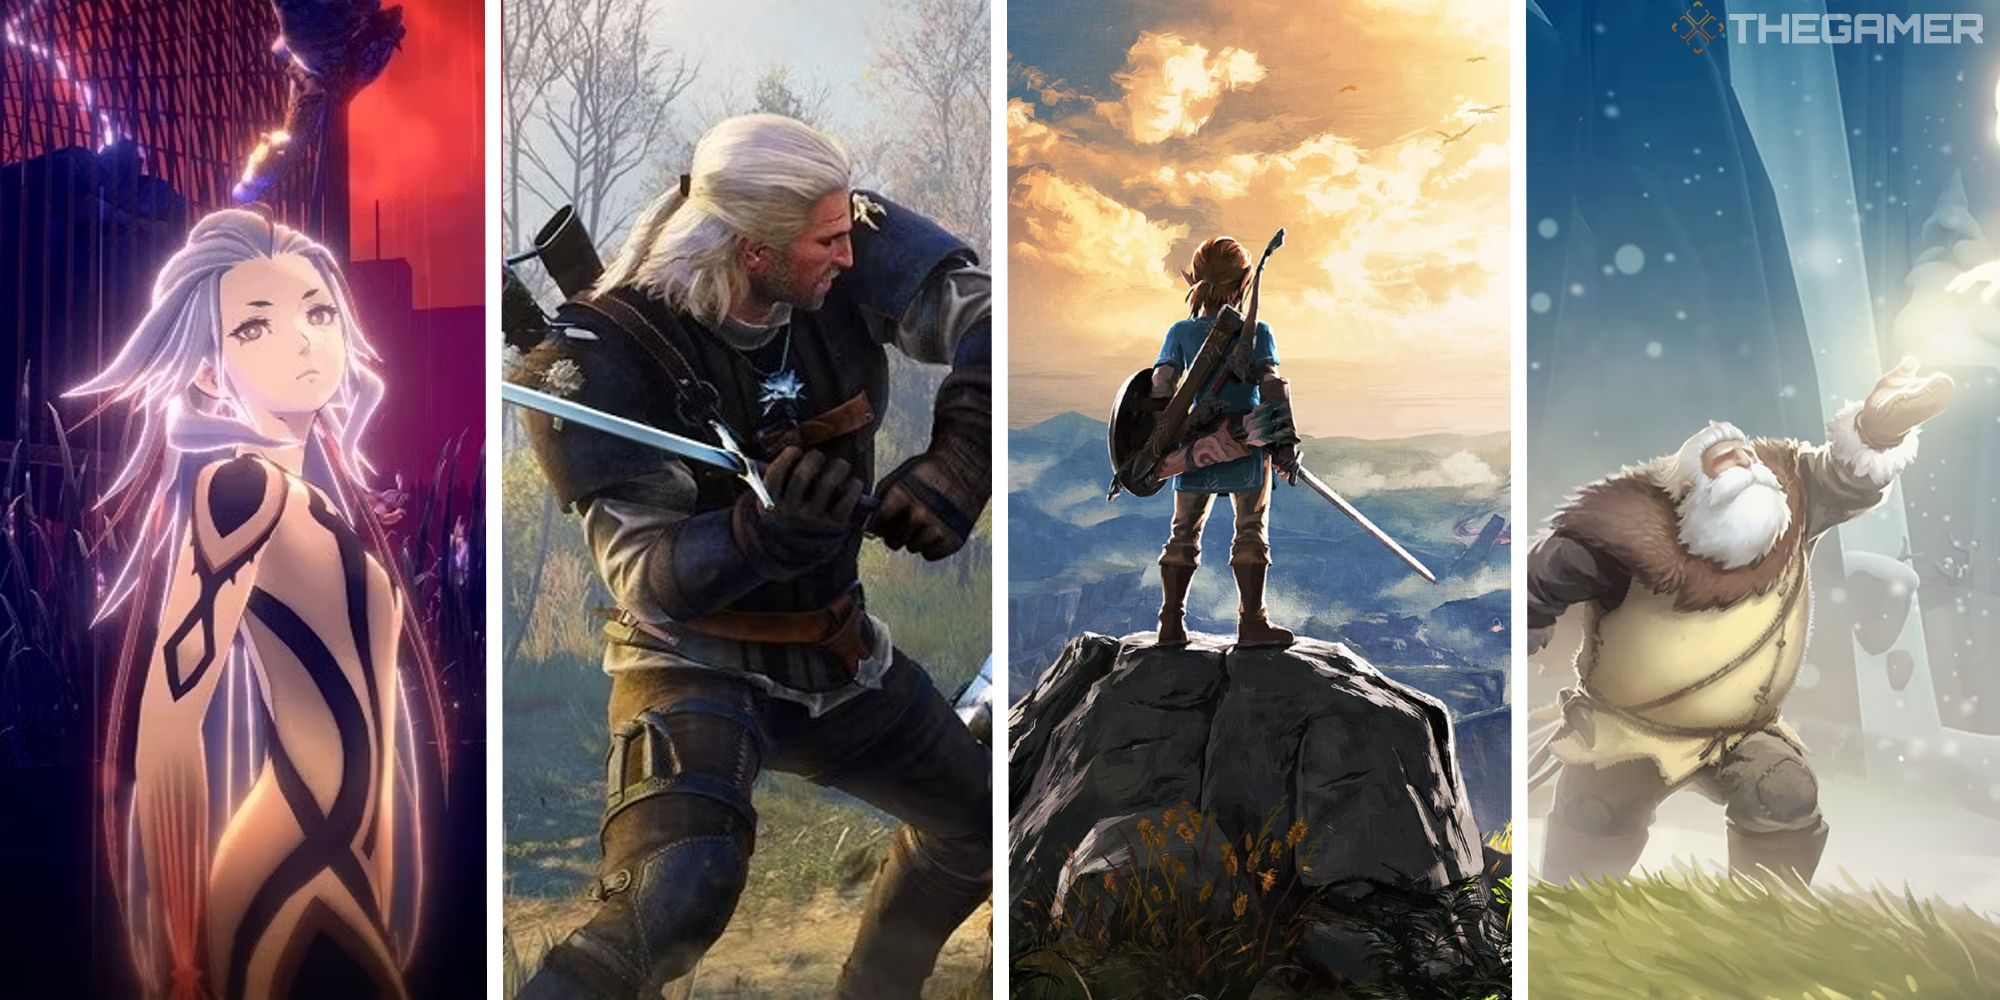 split image showing ai somnium files, the witcher, breath of the wild, and arise a simple story